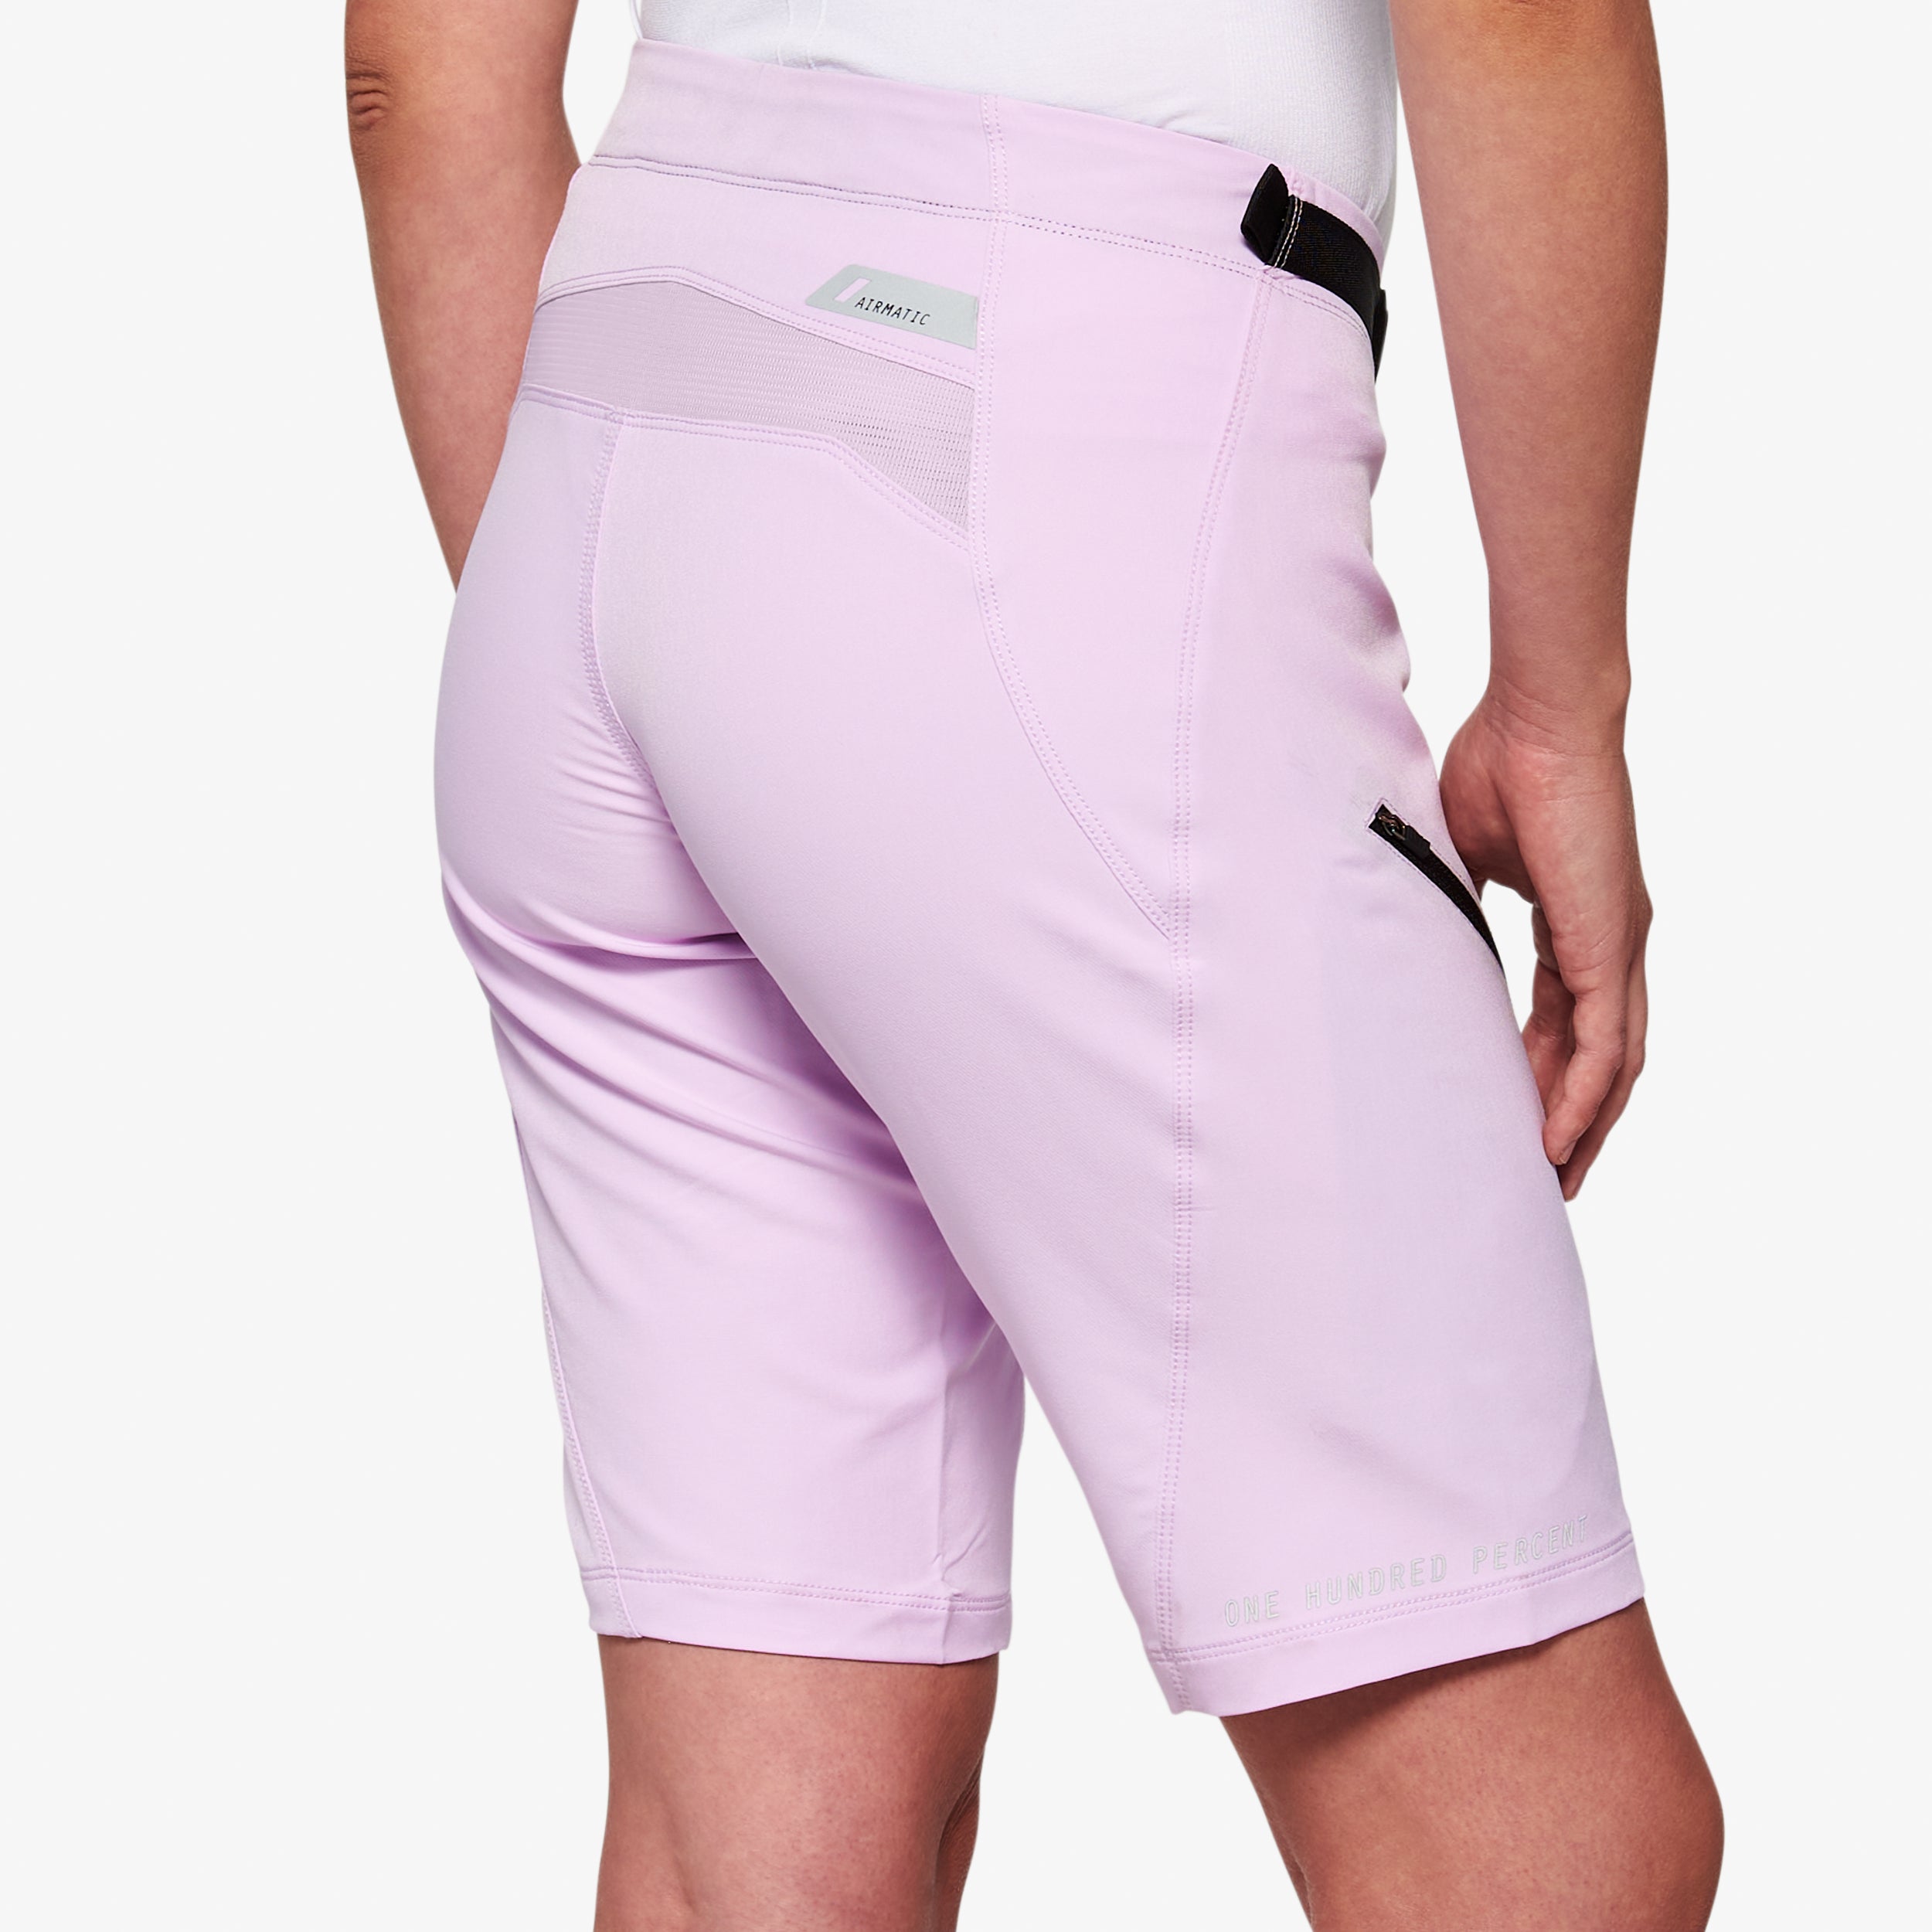 AIRMATIC Women's Shorts Lavender - Secondary